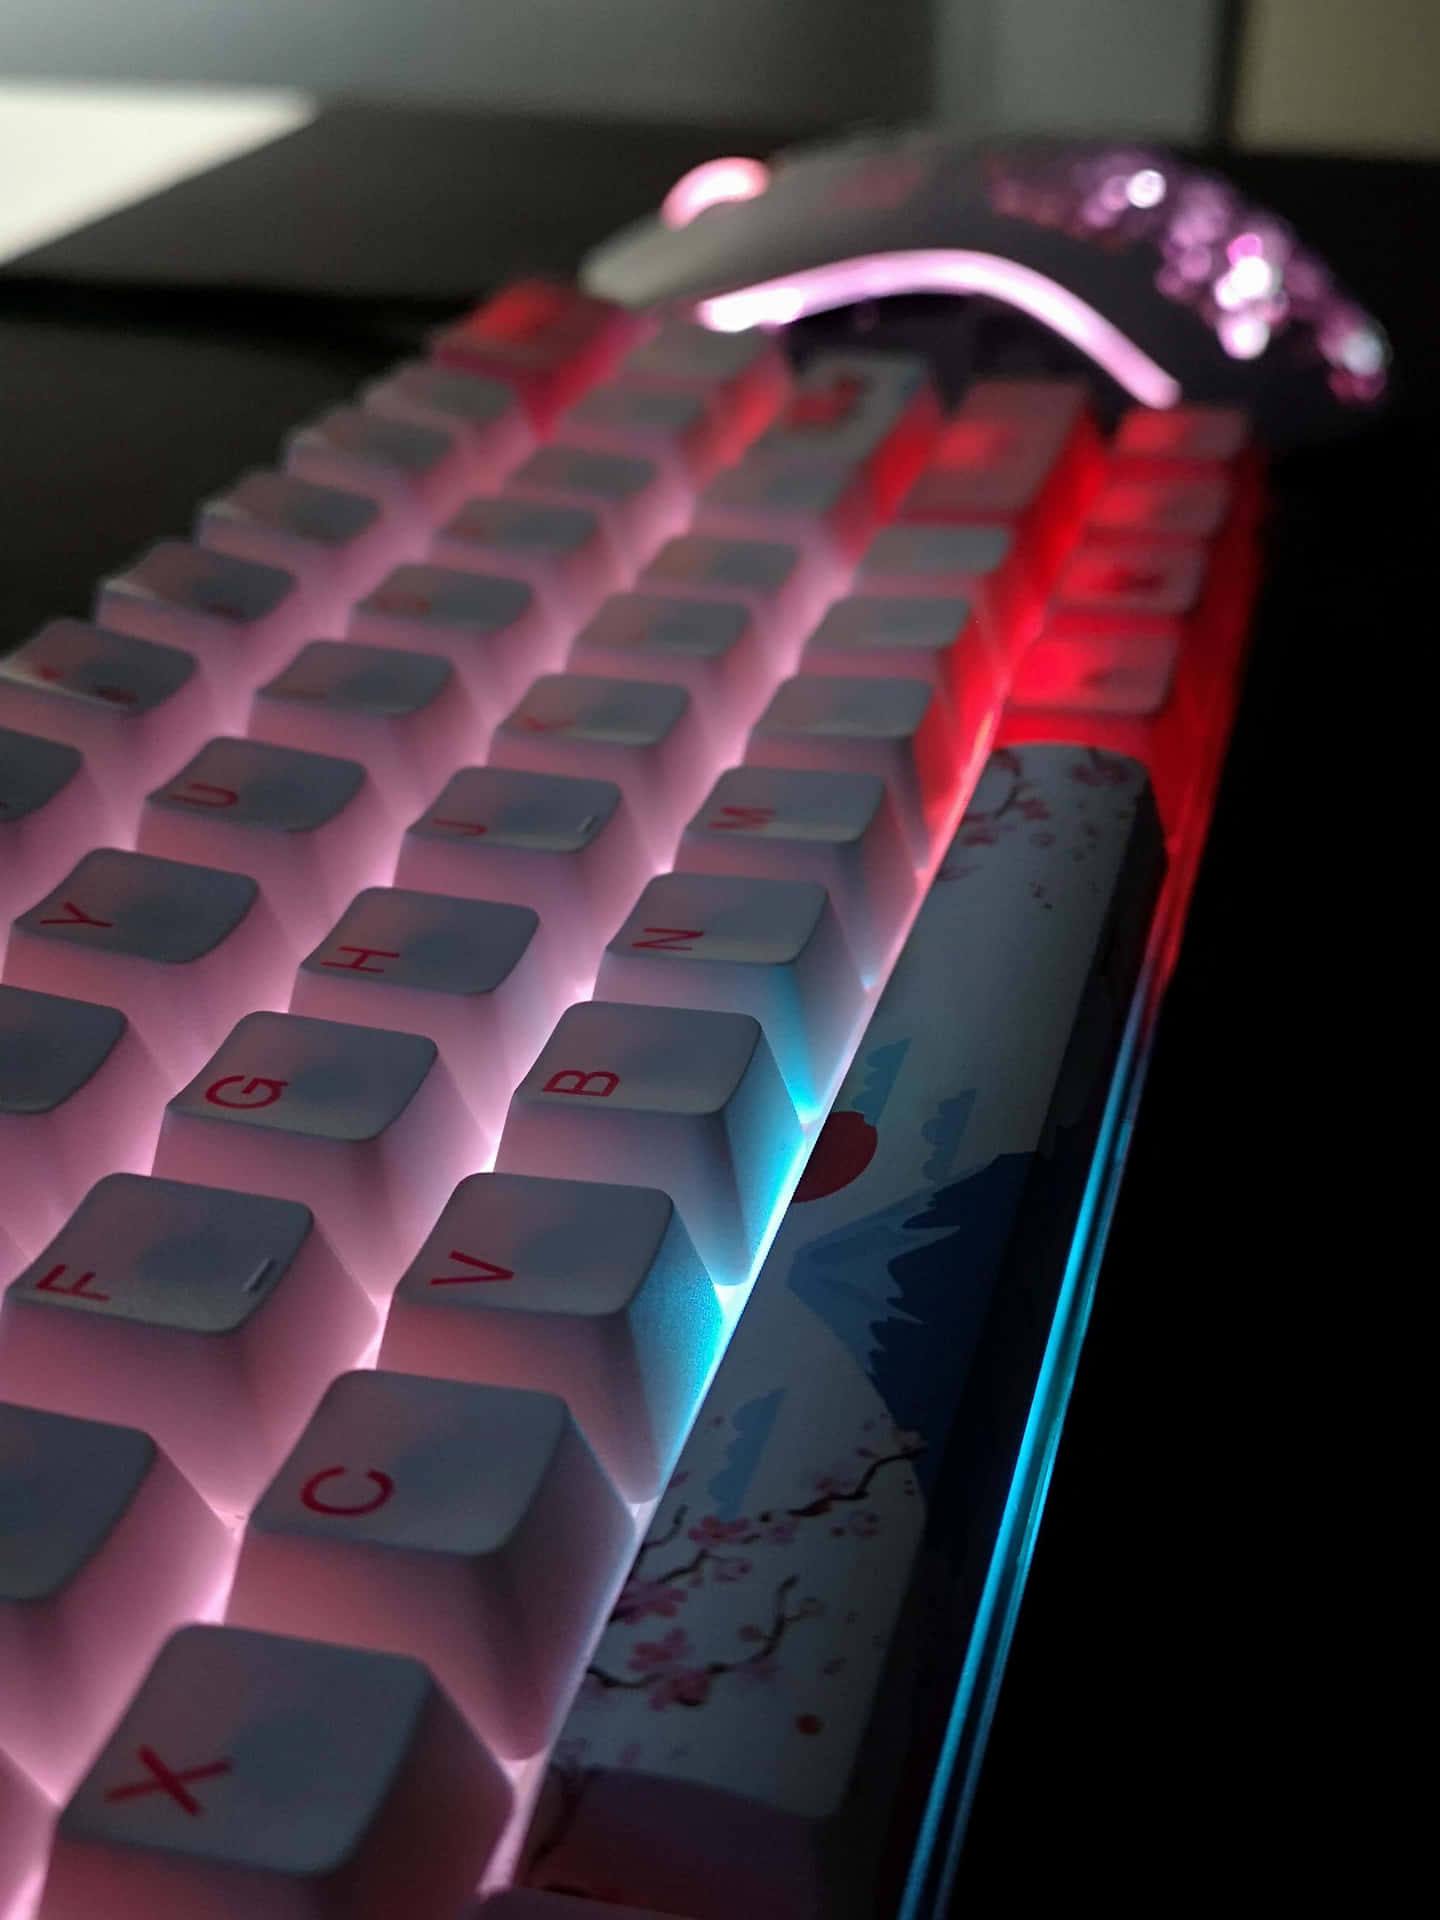 A Keyboard With Red And Blue Lights On It